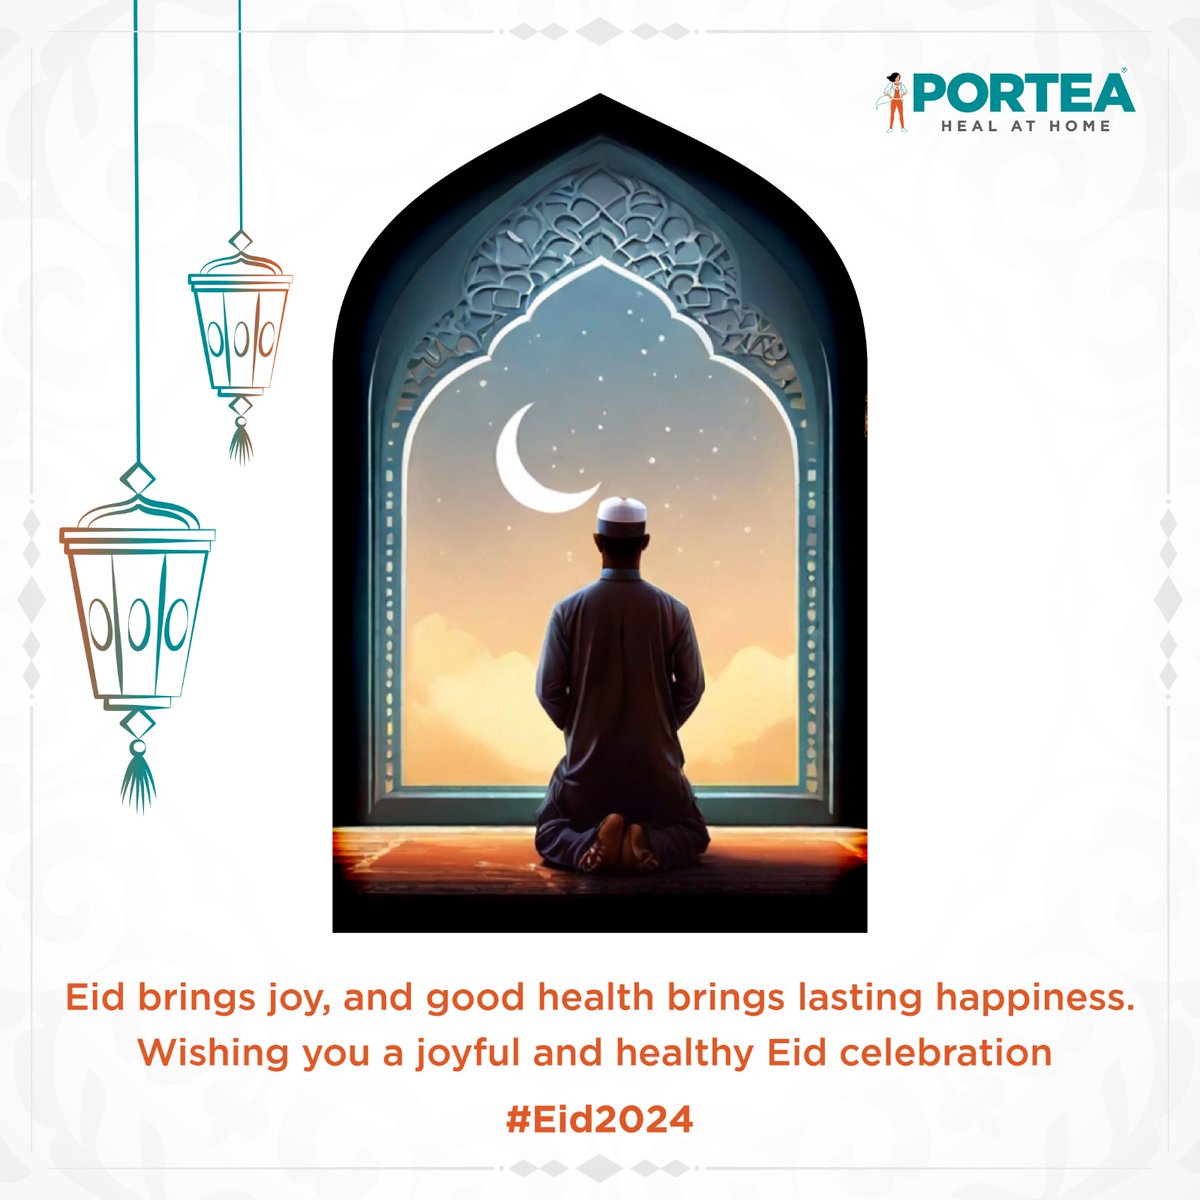 Eid greetings to all! May this festive season bring joy and good health to your doorstep. Wishing you a blessed Eid filled with happiness and wellness. #EidMubarak #JoyfulCelebration #HealthyLiving #WellnessJourney #Eid2024 #PorteaMedical #ChironCares